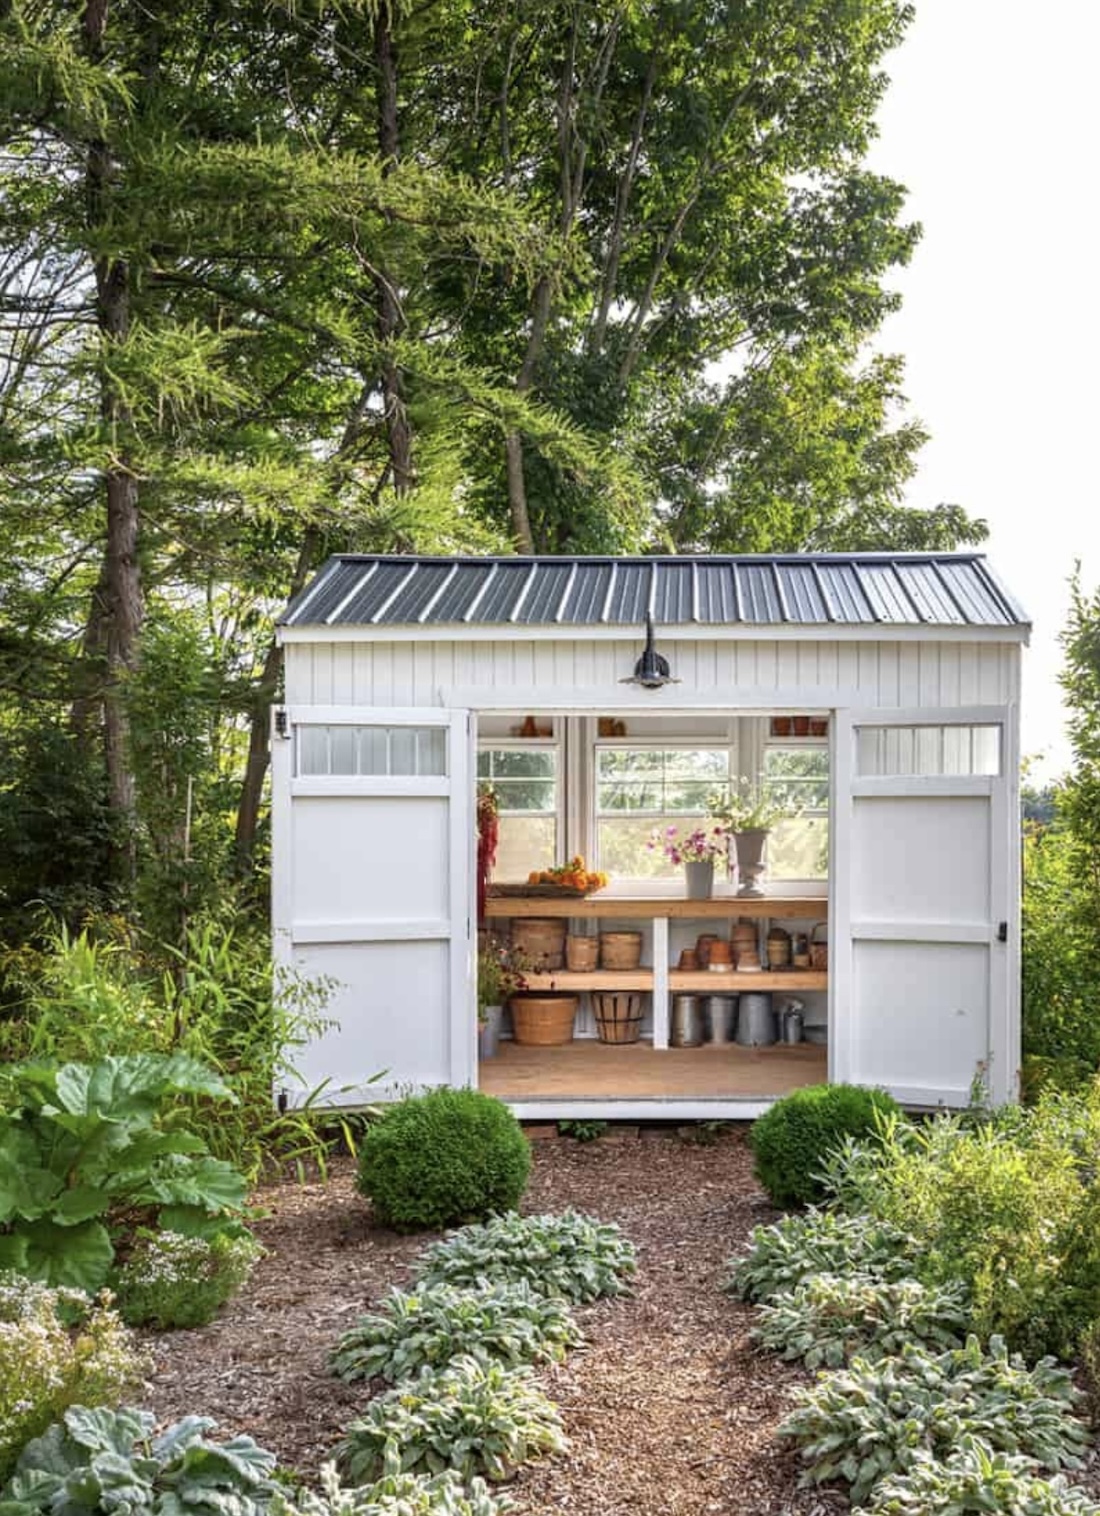 Shed turned garden room using sheds for purposes other than storage